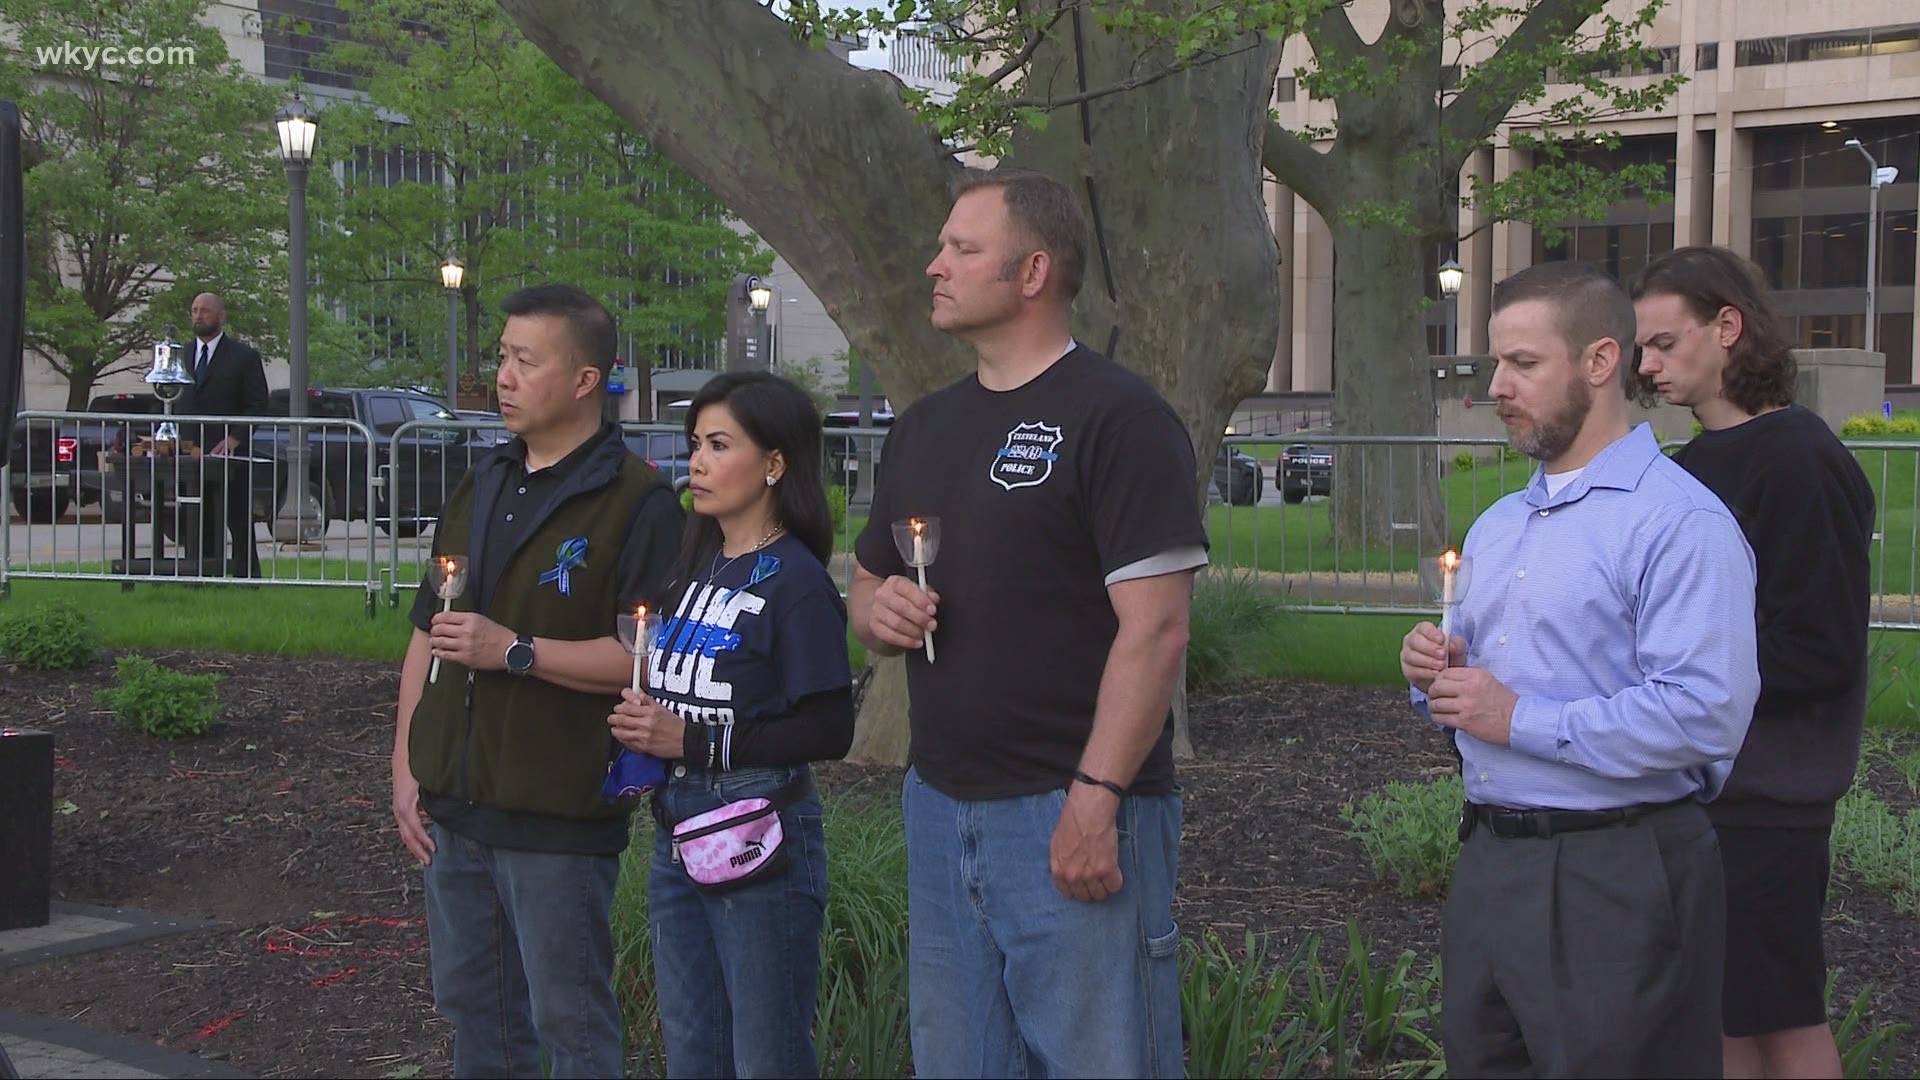 The vigil honored those police officers who have fallen in the line of duty. It's part of a weeklong series of events commemorating Police Week.